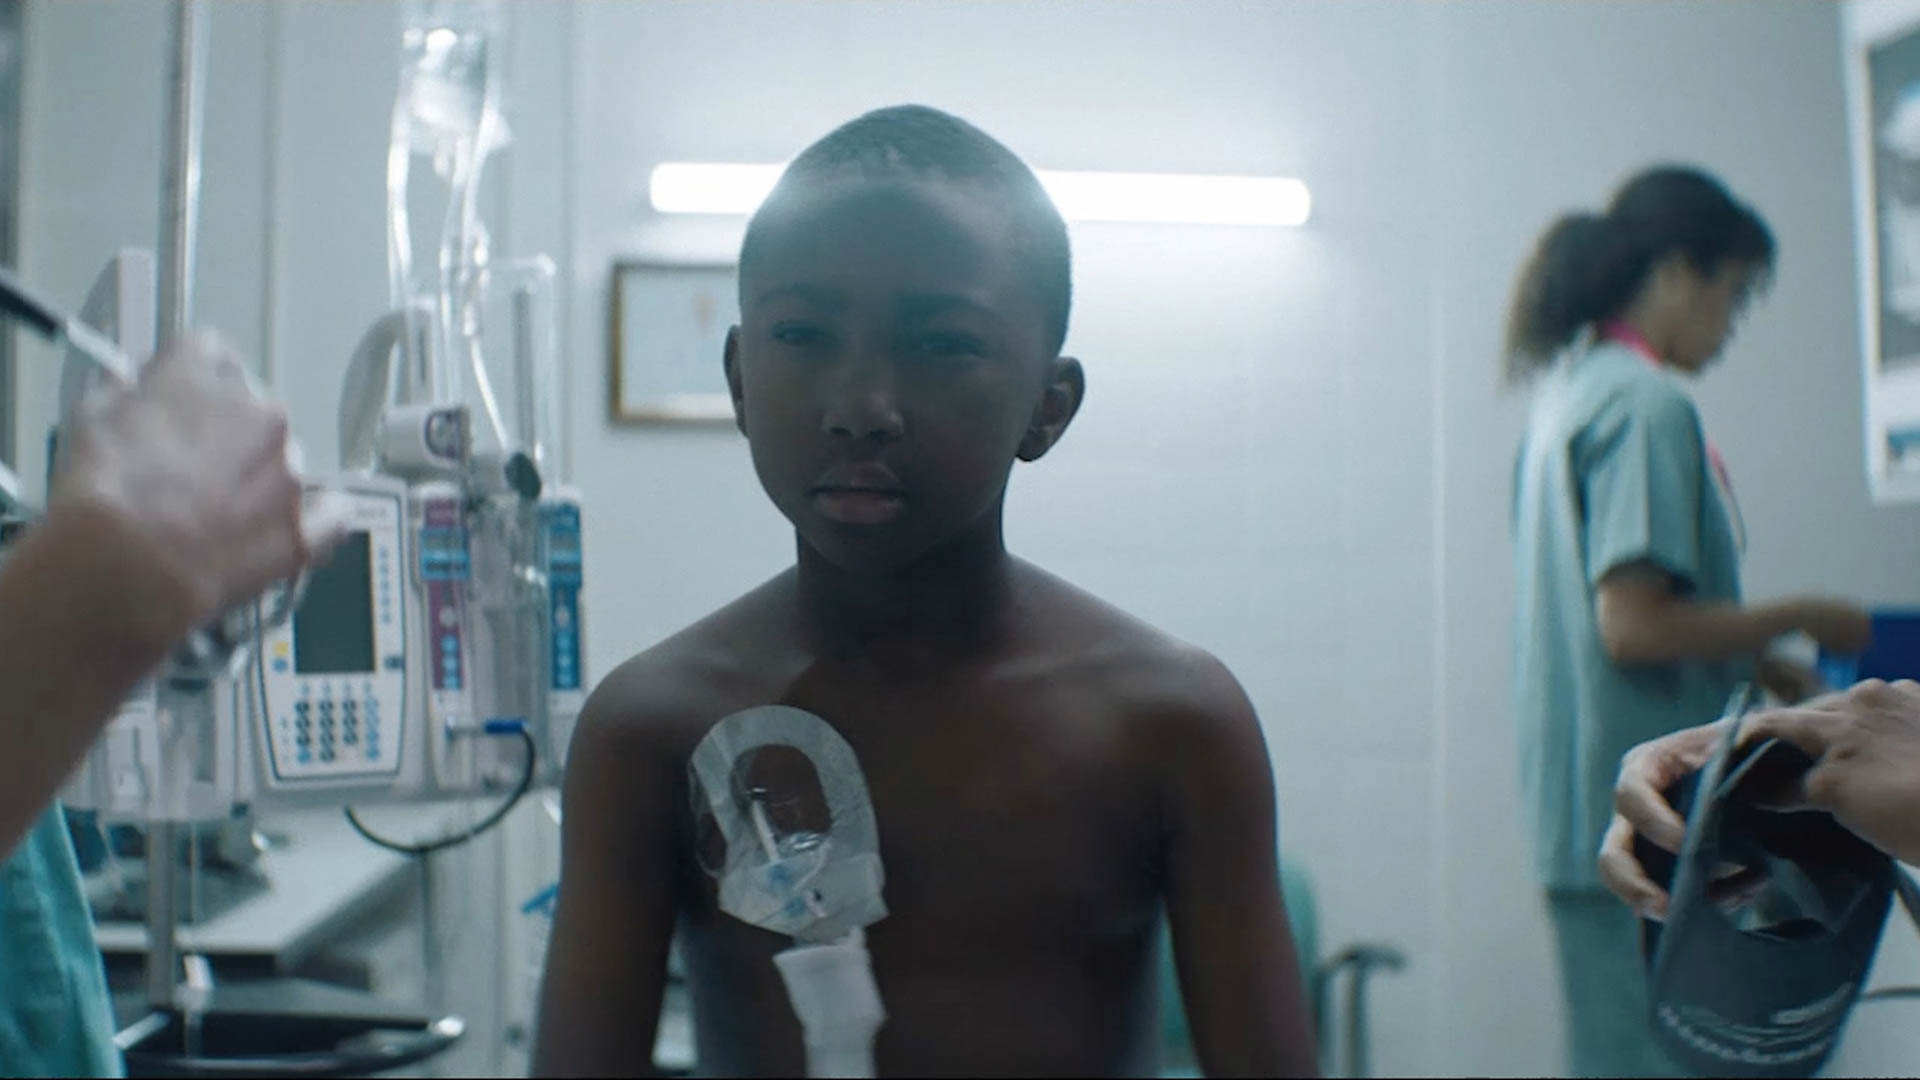 SickKids VS - This Is Why